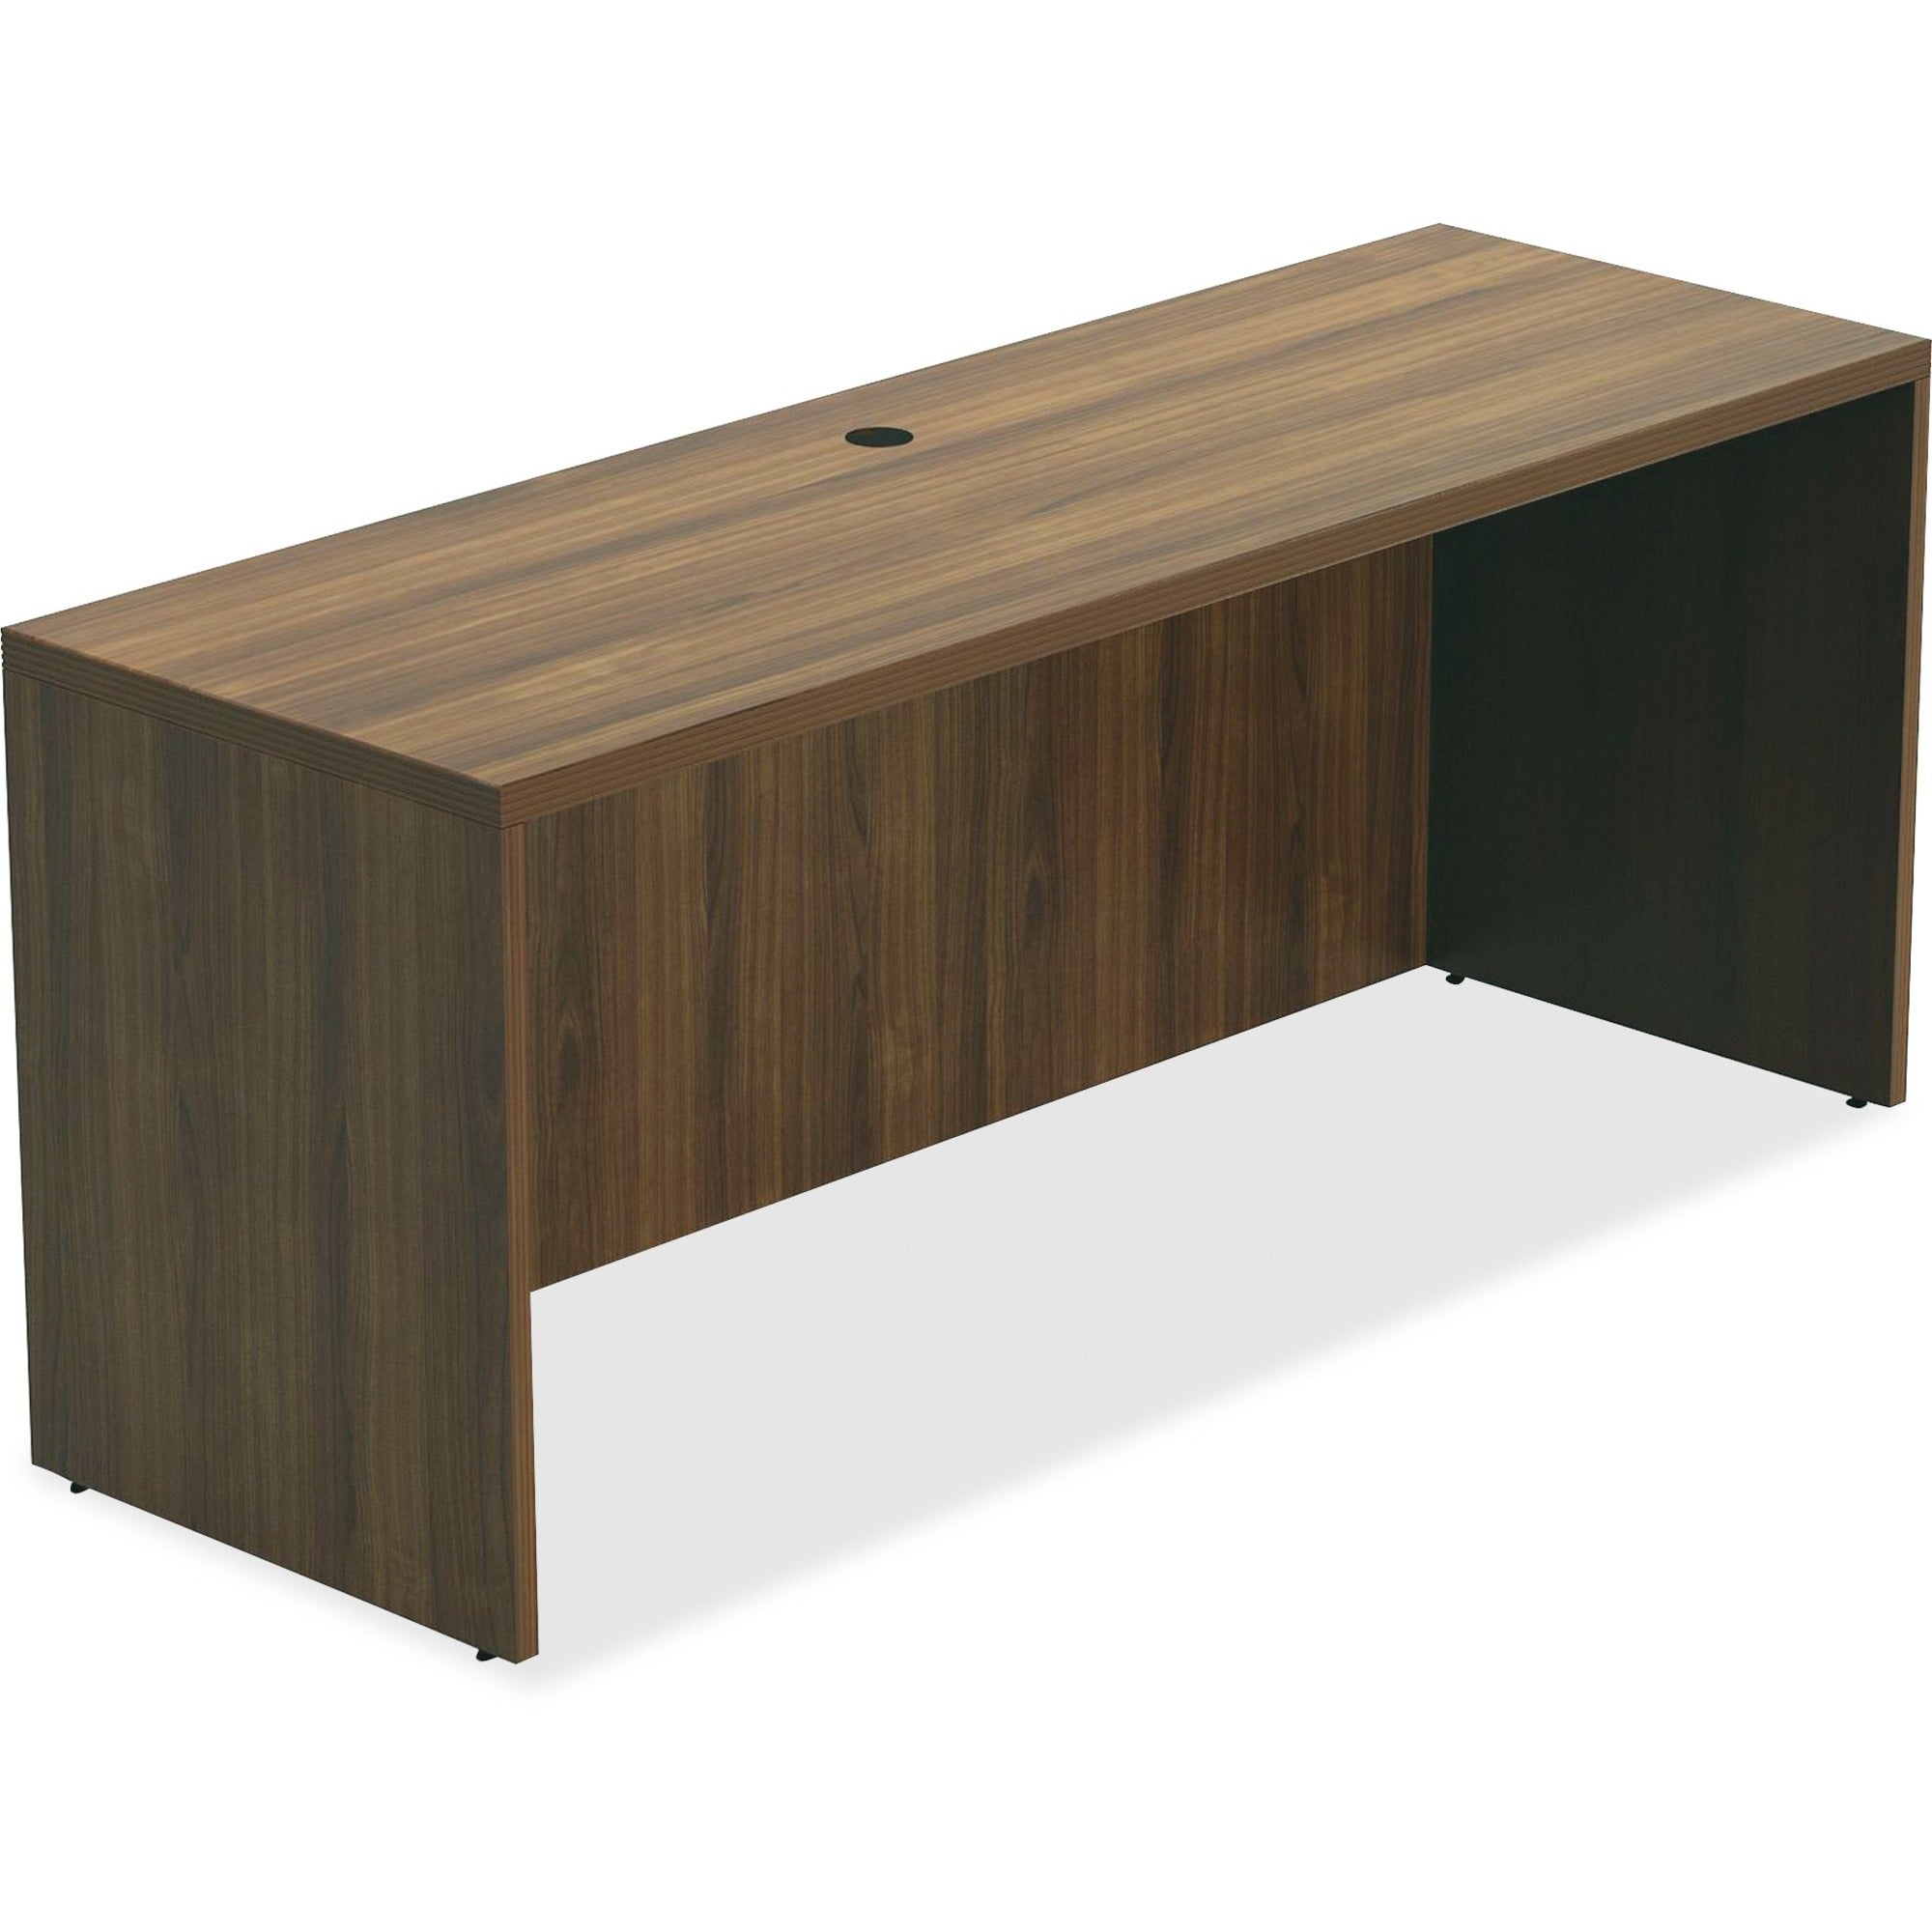 Lorell Chateau Series Credenza - 66.1" x 23.6"30" Credenza, 1.5" Top - Reeded Edge - Material: P2 Particleboard - Finish: Walnut, Laminate - Durable, Grommet, Cord Management, Modesty Panel - For Office - 